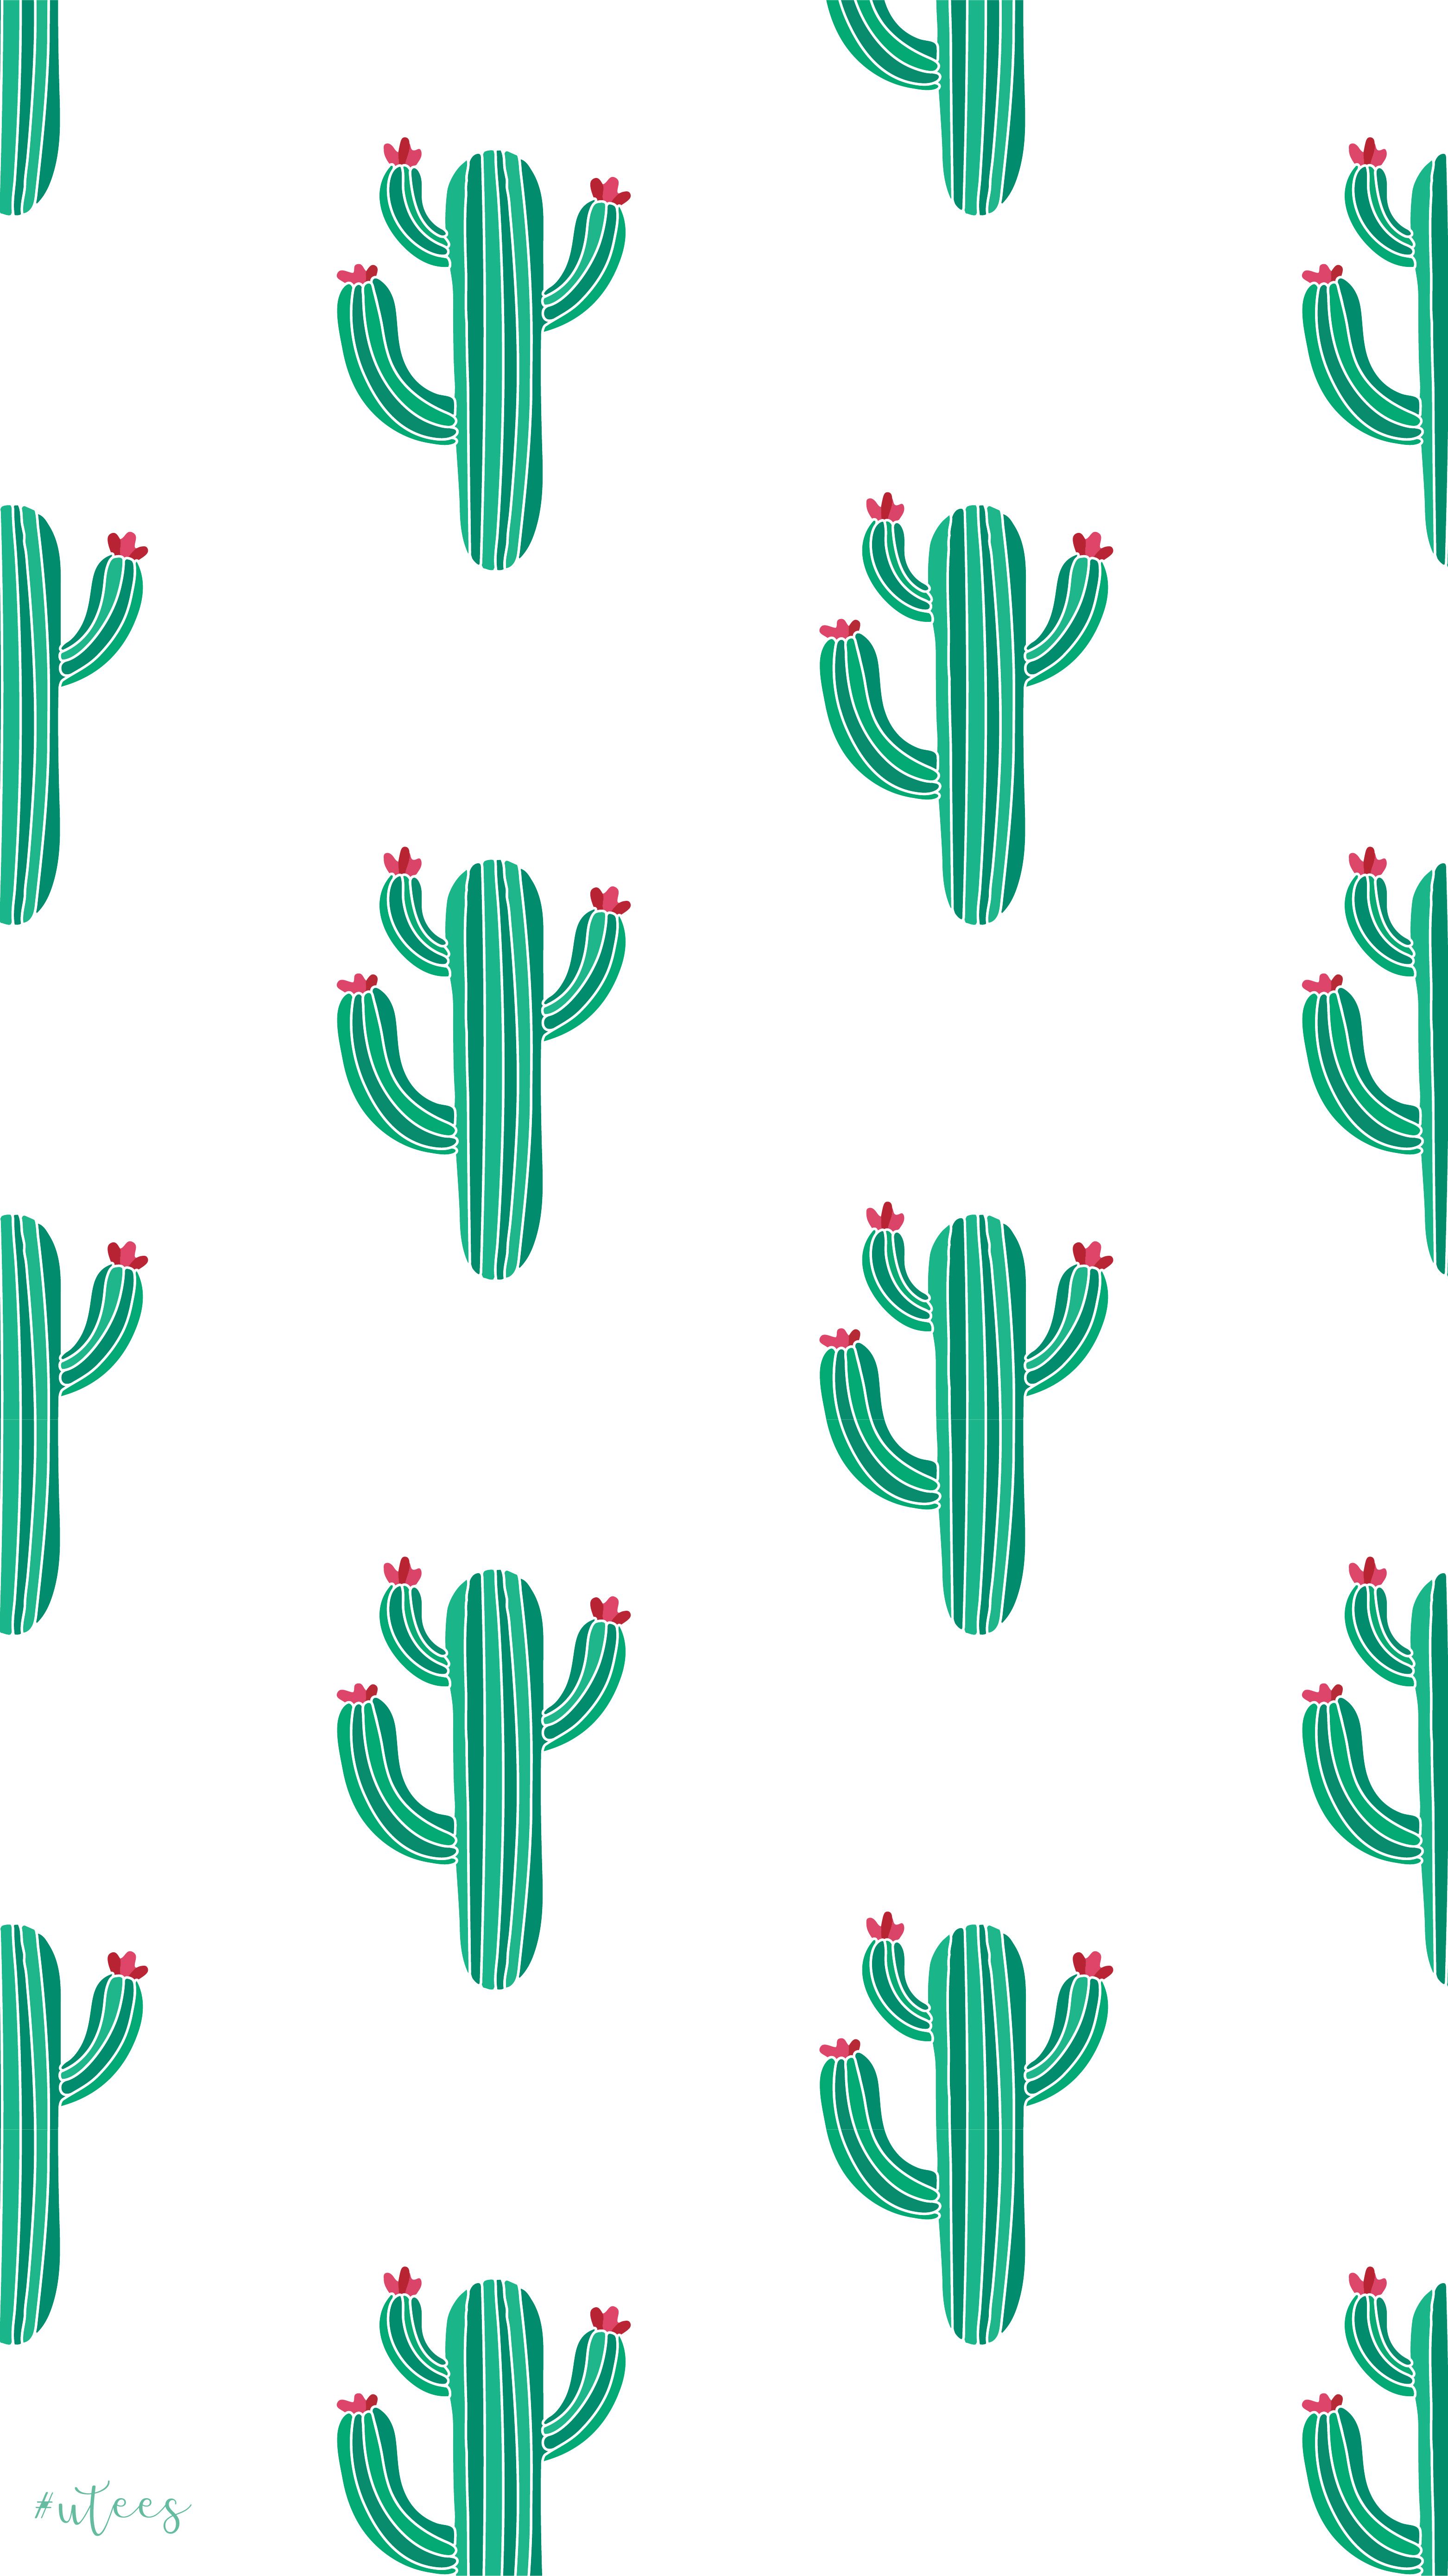 Cactus Wallpaper Design I Made by University Tees Design Team. Cute wallpaper for phone, Wallpaper iphone cute, Cute patterns wallpaper